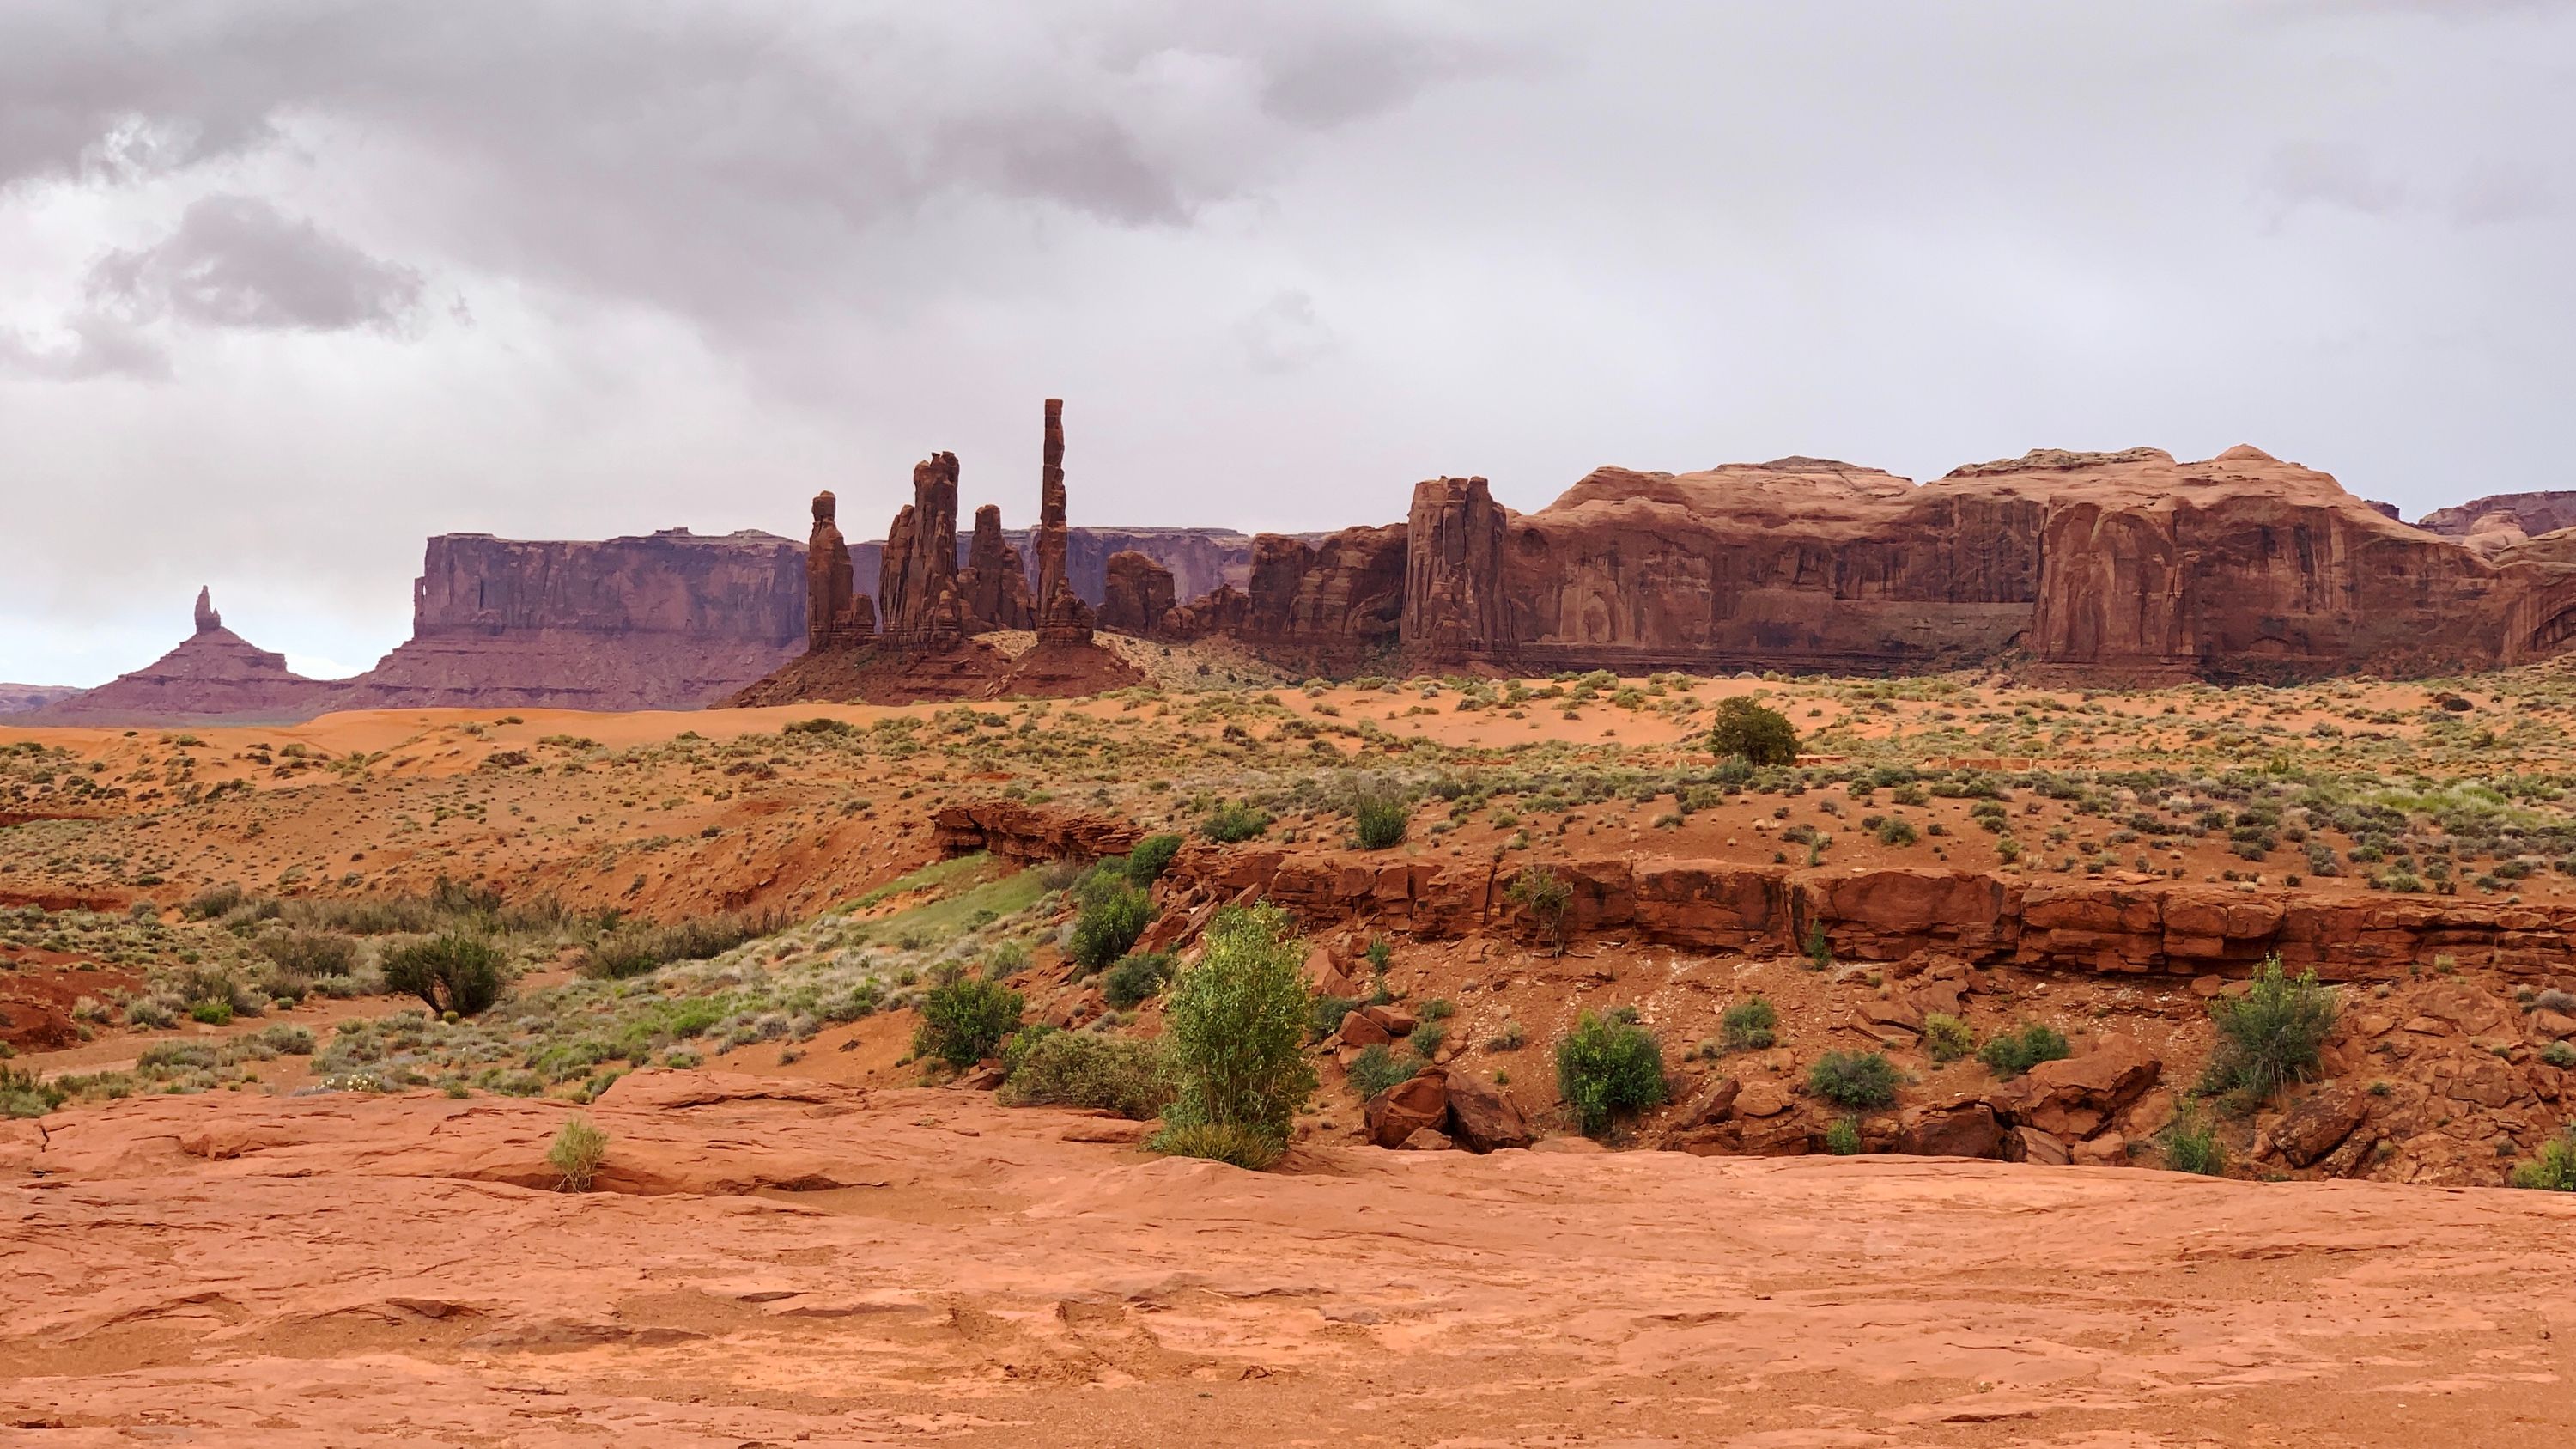 A view near The Thumb, Monument Valley